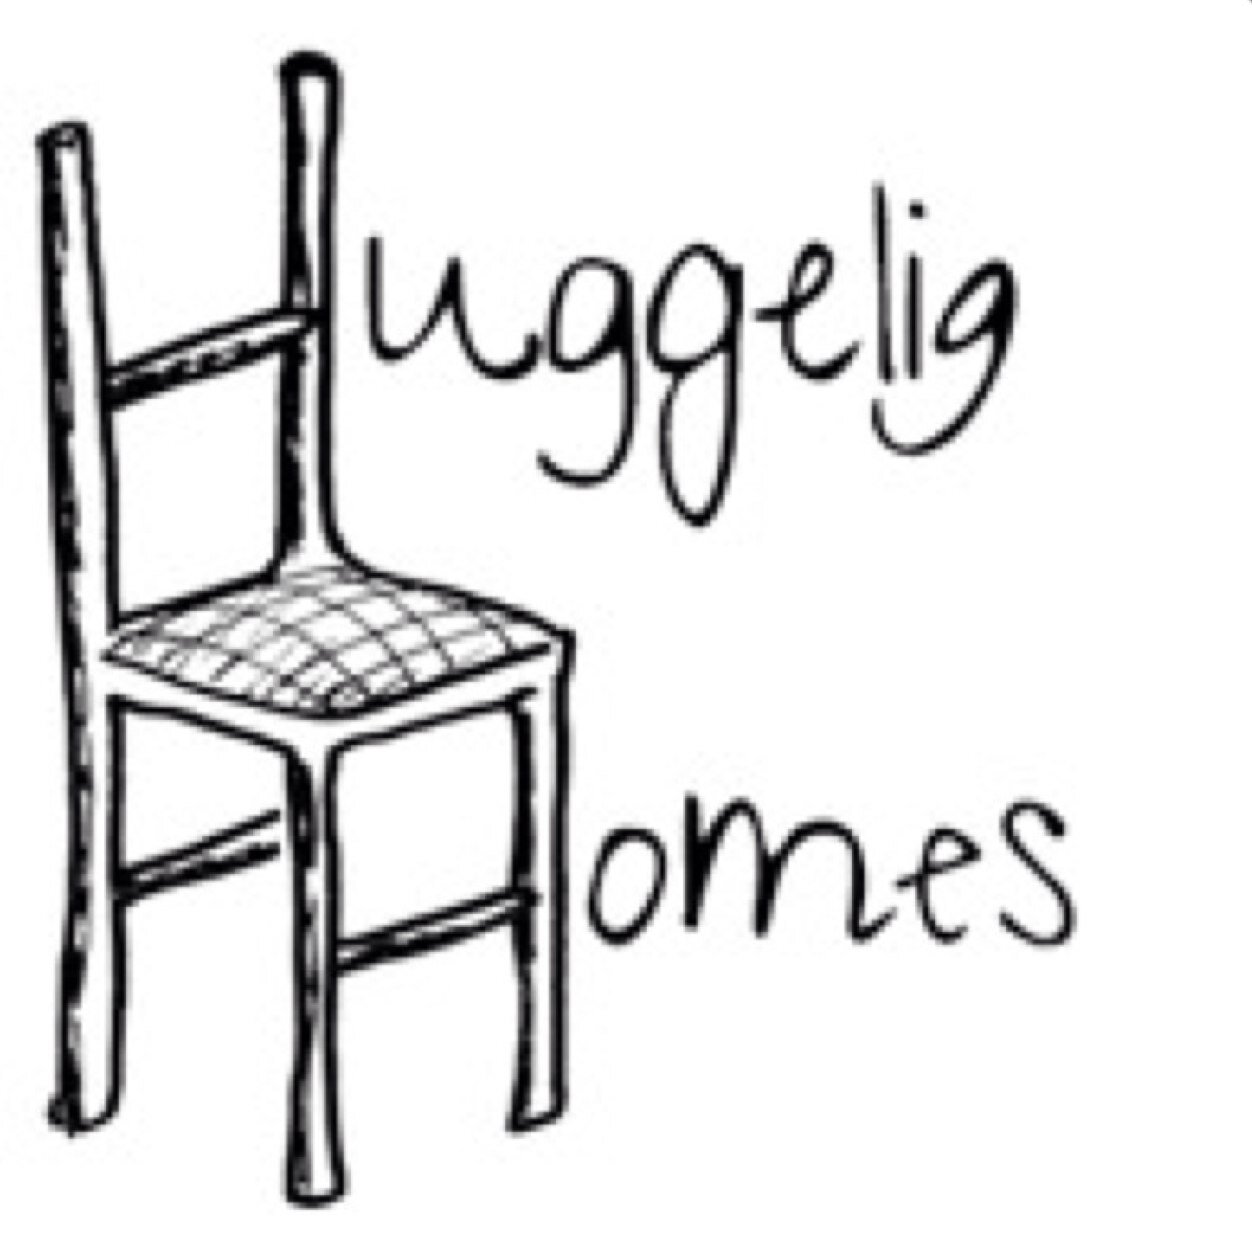 Huggelig Homes is a home staging and design company started in 2006 by Karen Salveson.